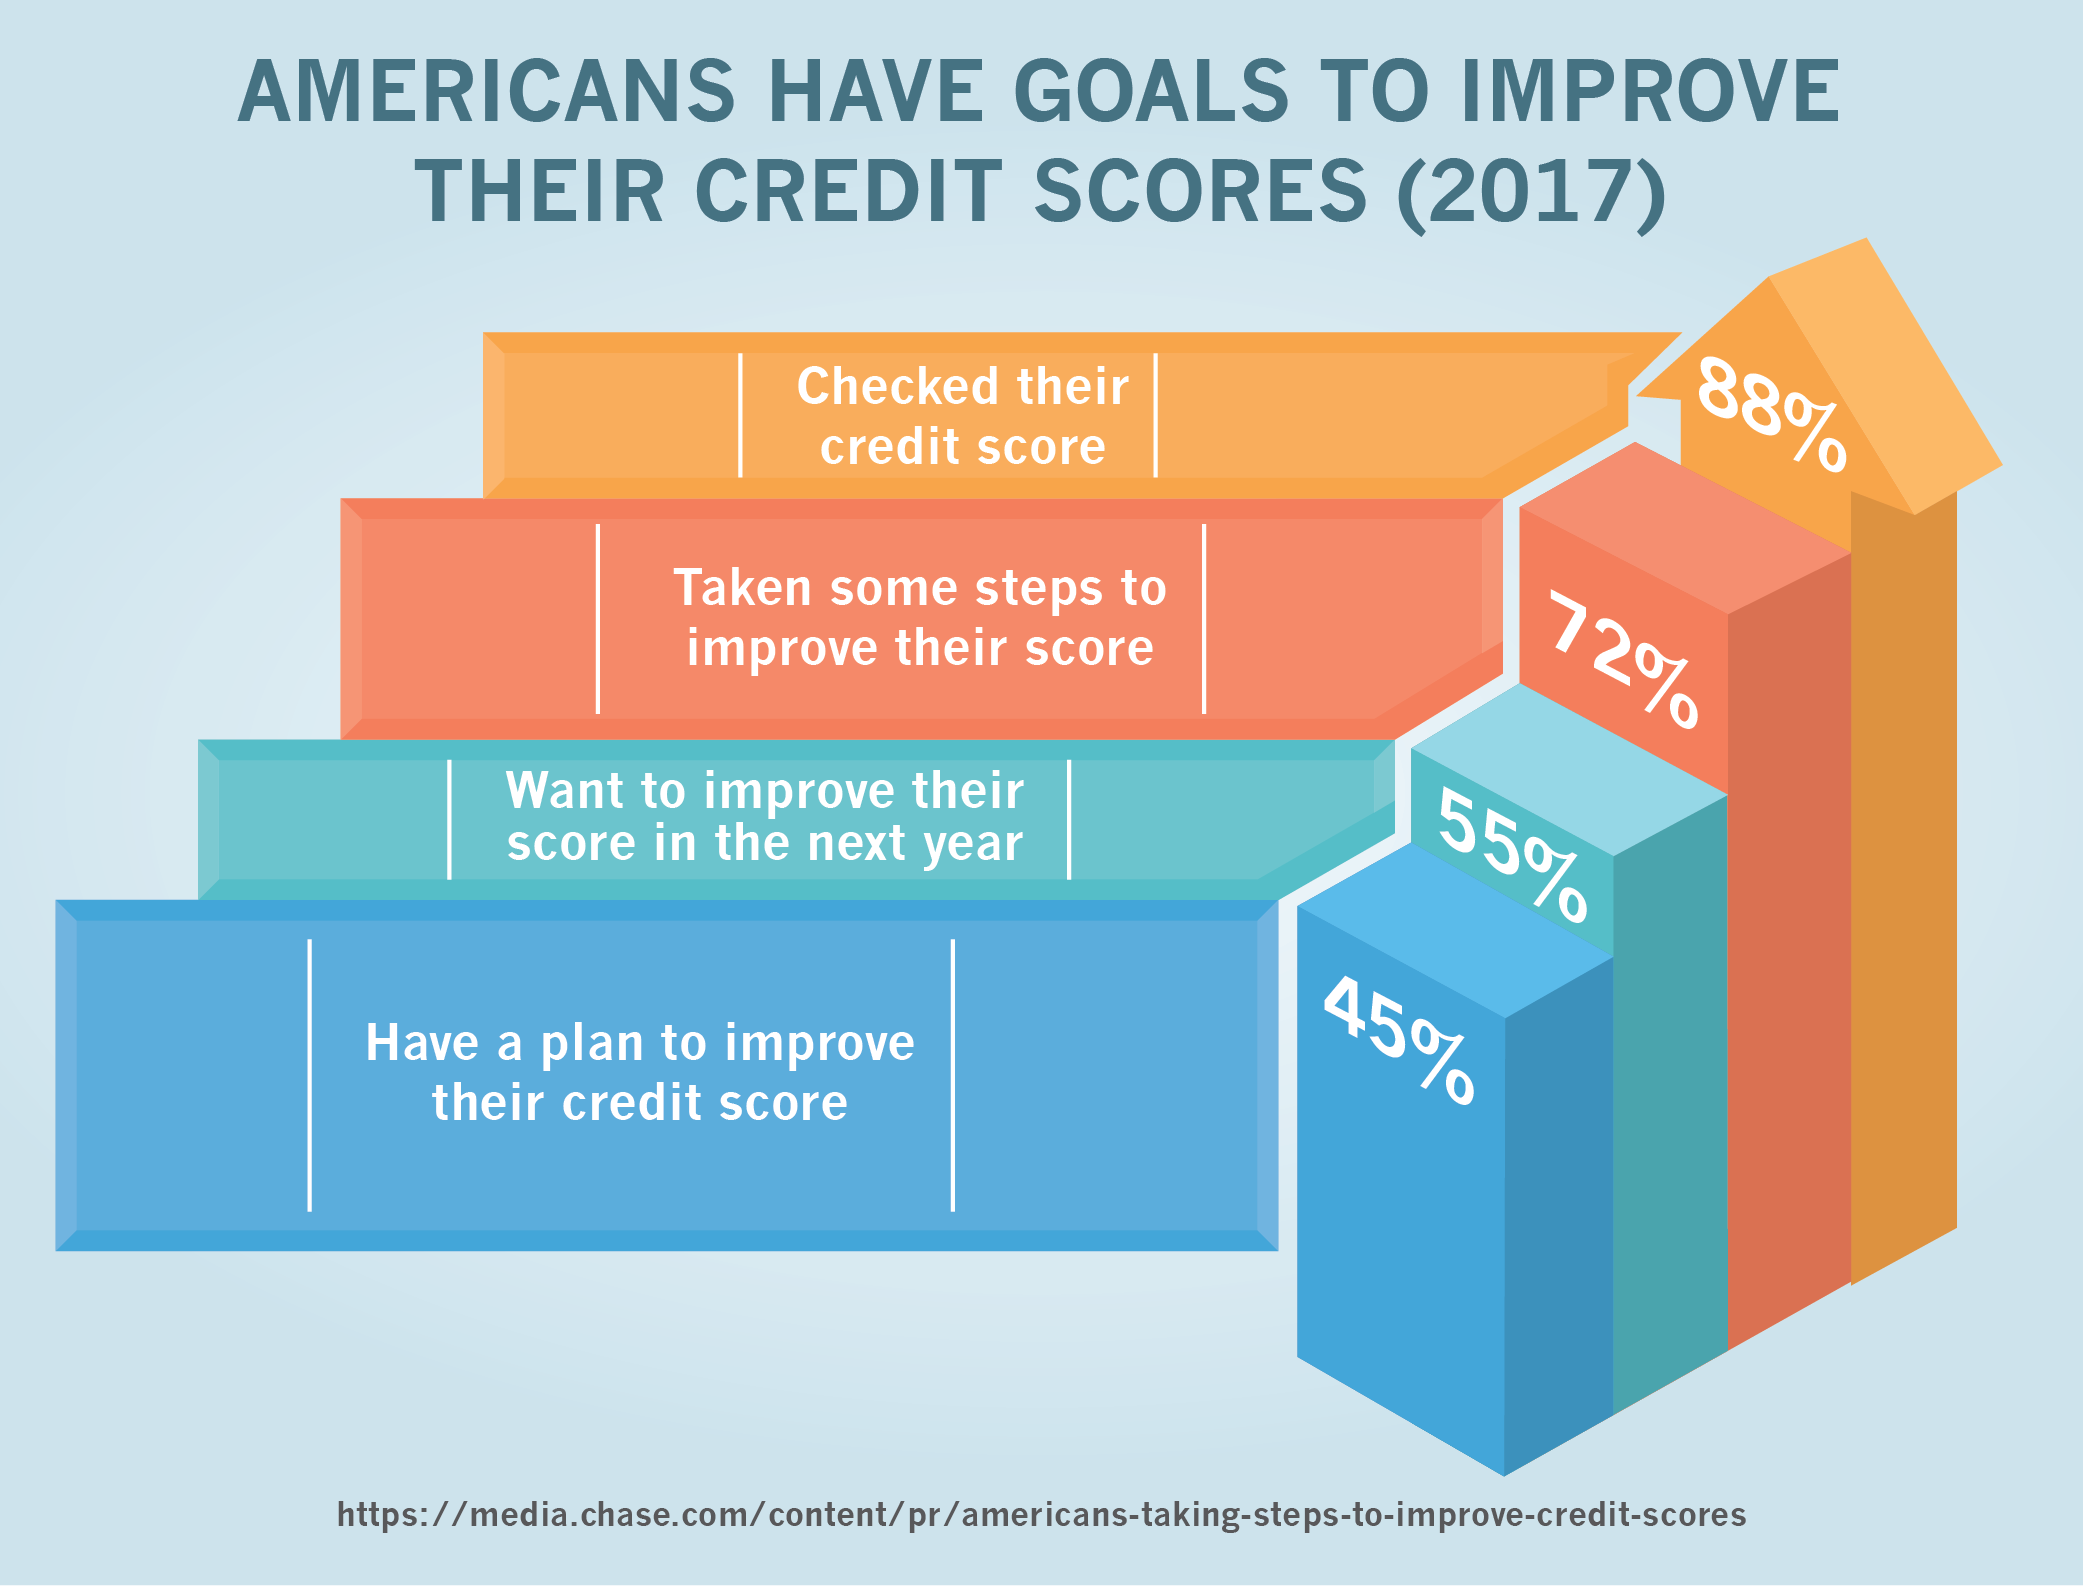 Americans Have Goals to Improve their Credit Scores (2017)